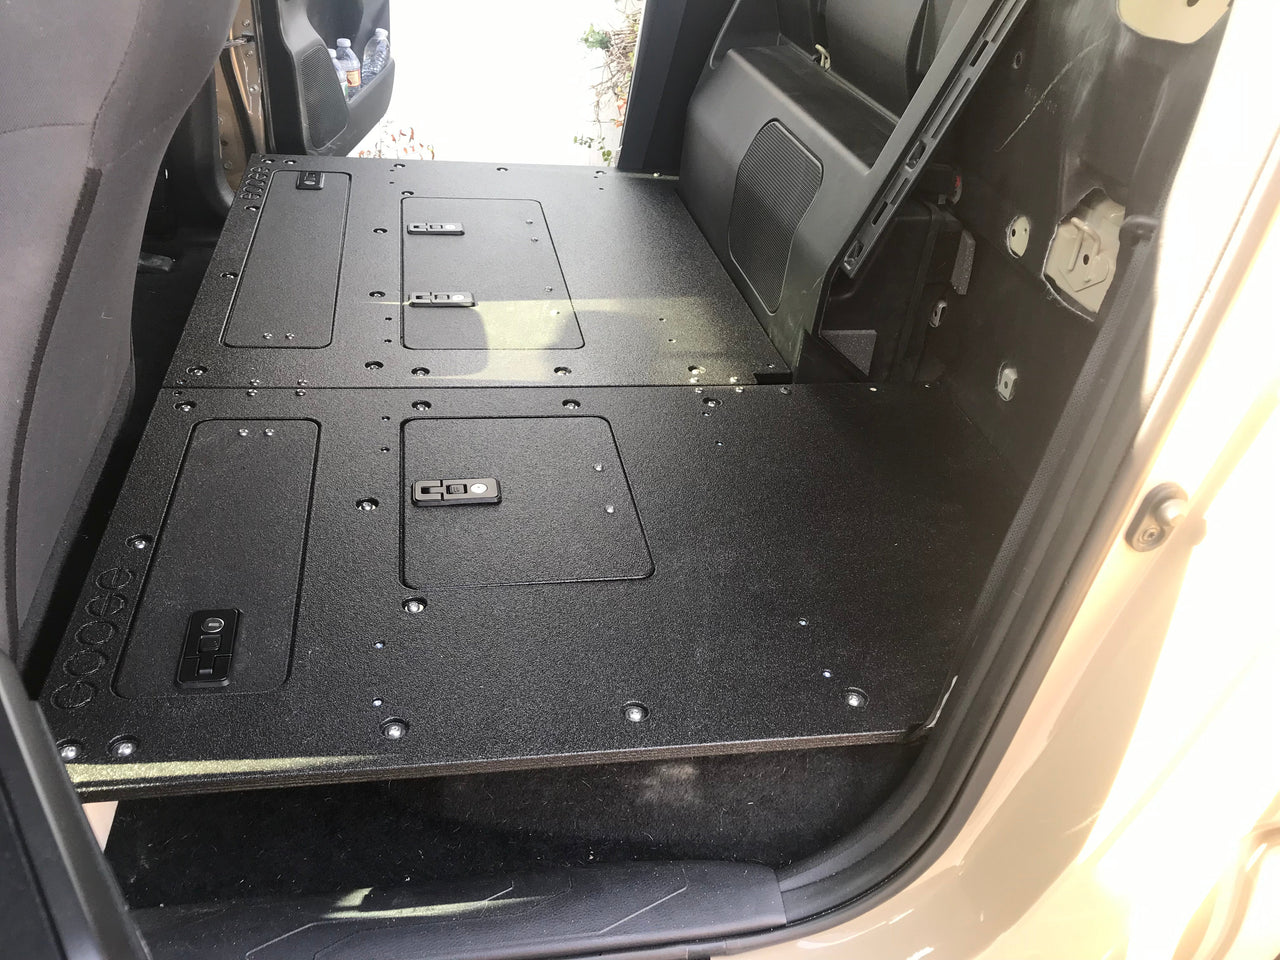 GOOSE GEAR Toyota Tacoma 2005-Present 2nd and 3rd Gen. Double Cab - Second Row Seat Delete Plate System keeping Factory Back Wall